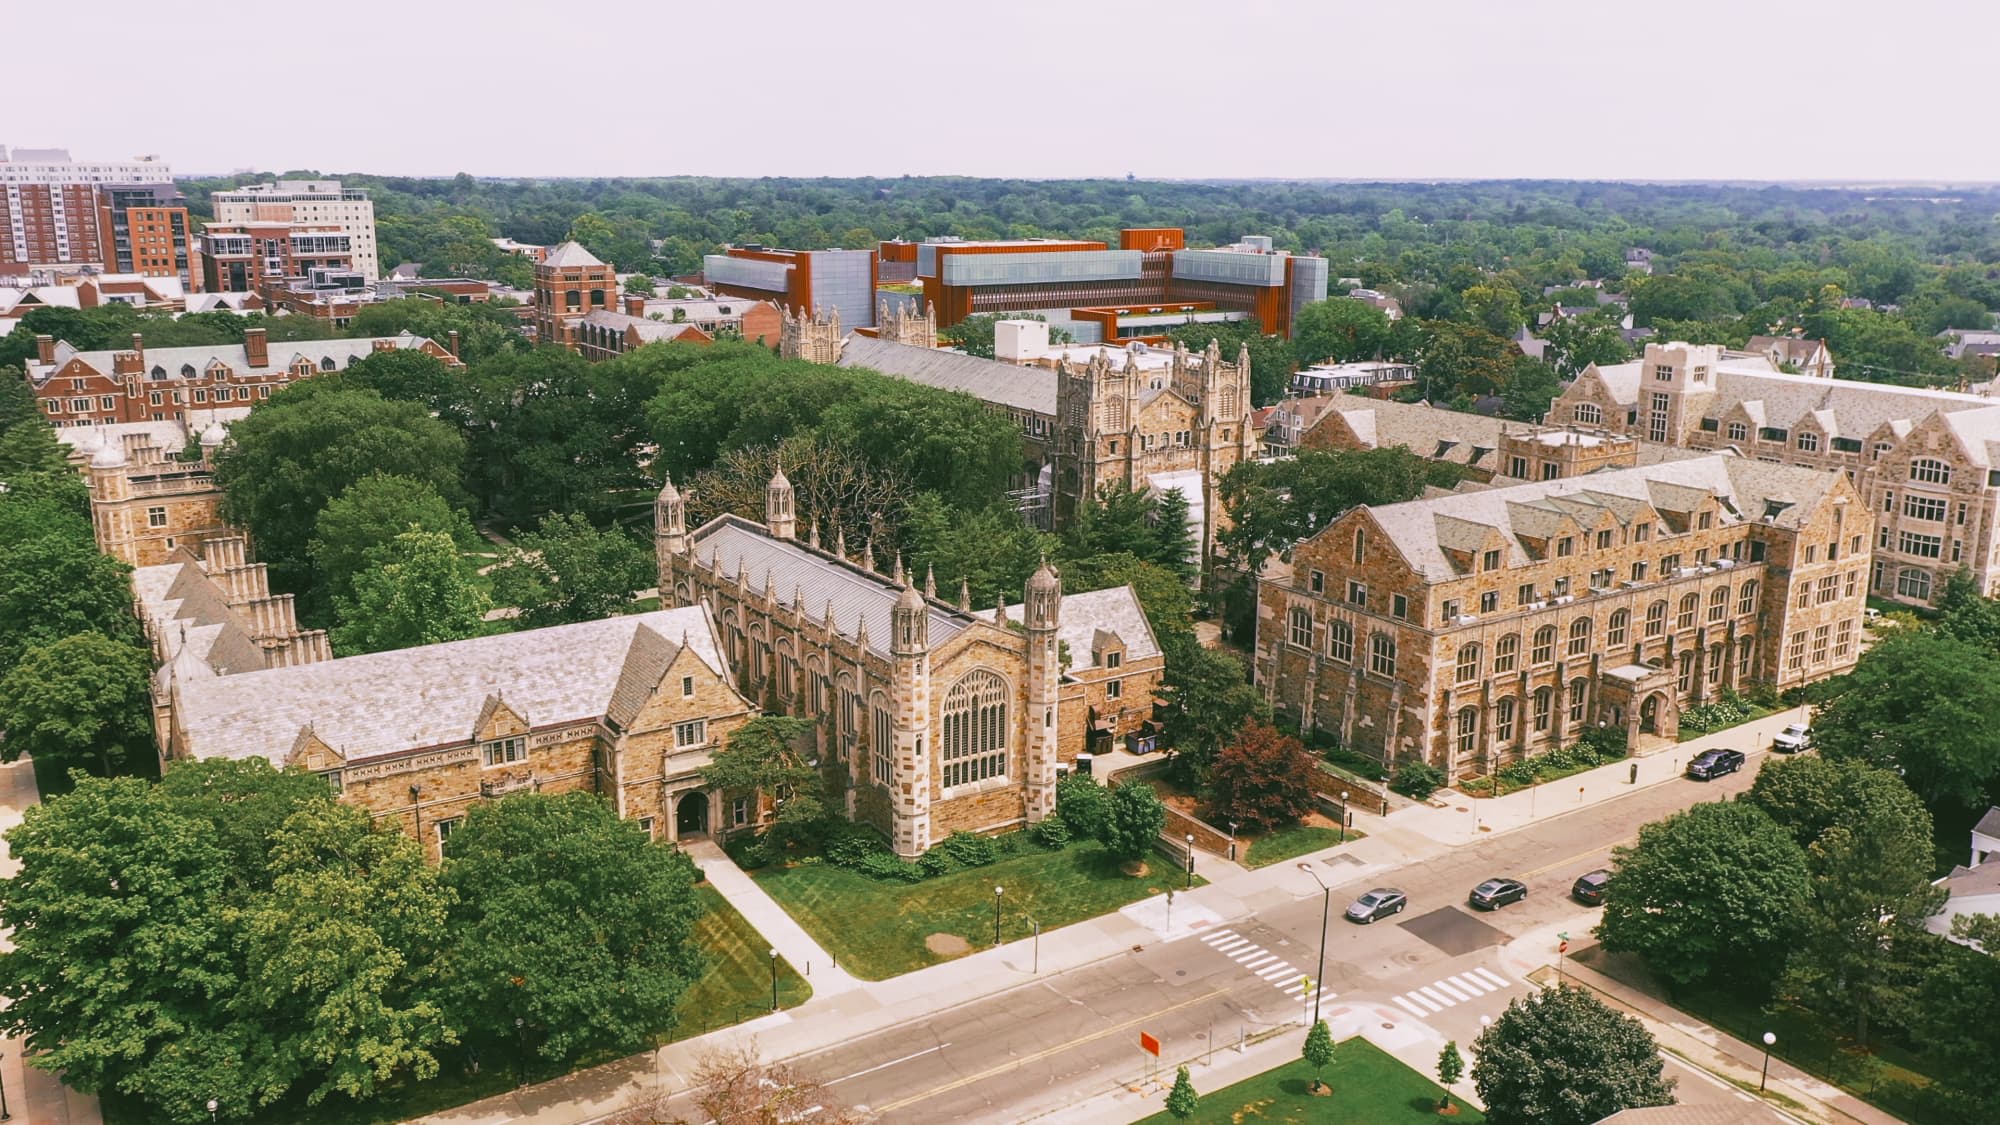 25 Best College Towns and Cities in the U.S.